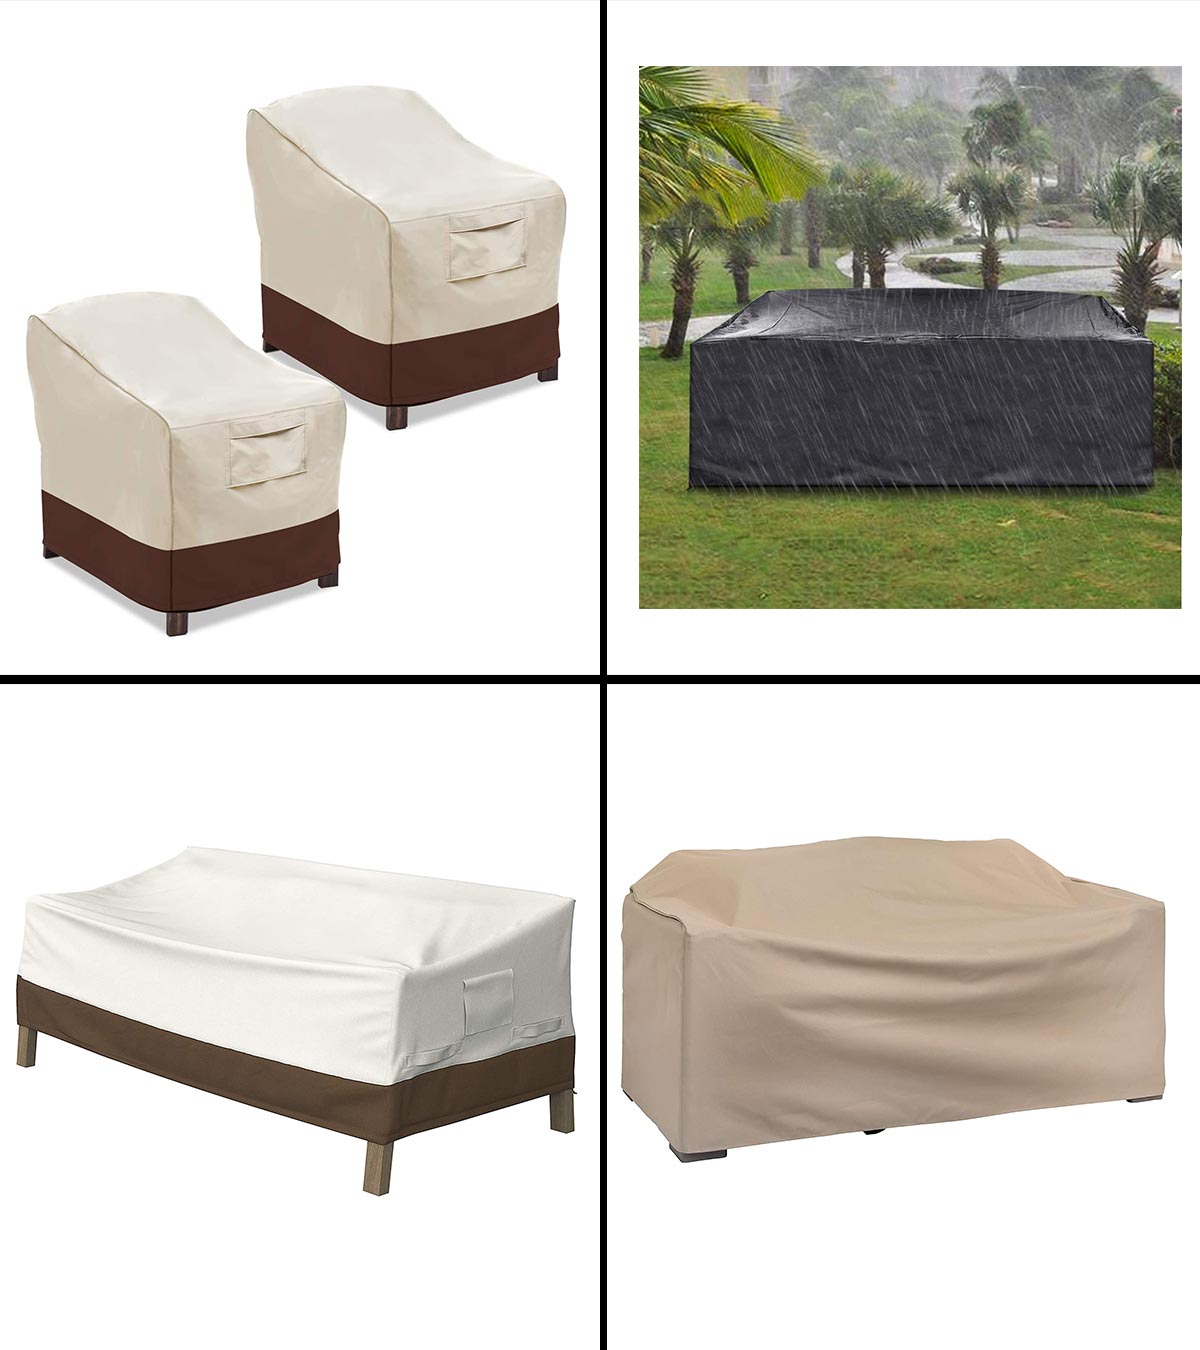 2 Pack Heavy Duty Waterproof Outdoor Deep Seat Cover ProHome Direct Patio Chair Cover Large-38inch Beige & Brown All Weather Protect Lawn Patio Furniture Cover 